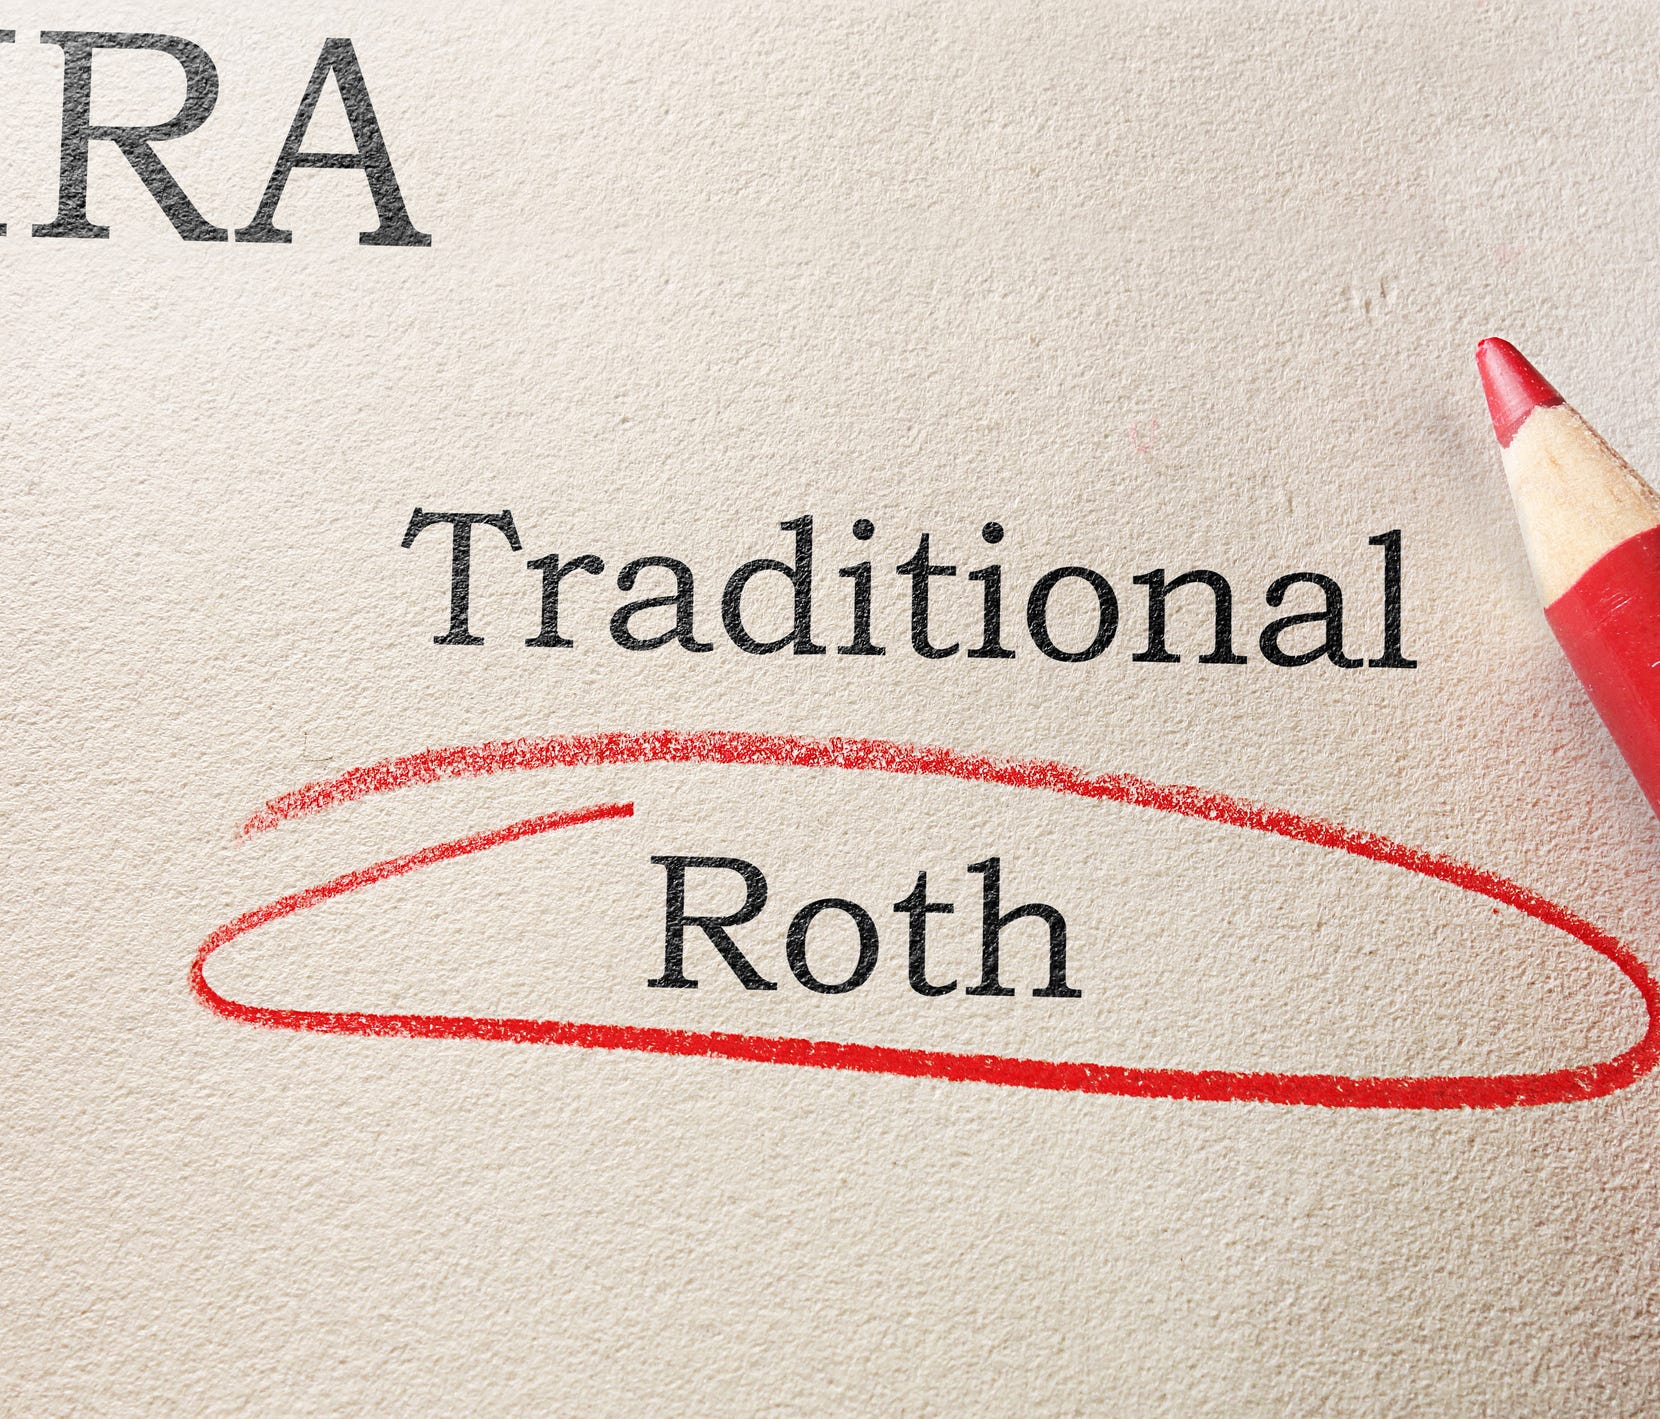 For flexibility in retirement savings, experts say choose a Roth IRA.